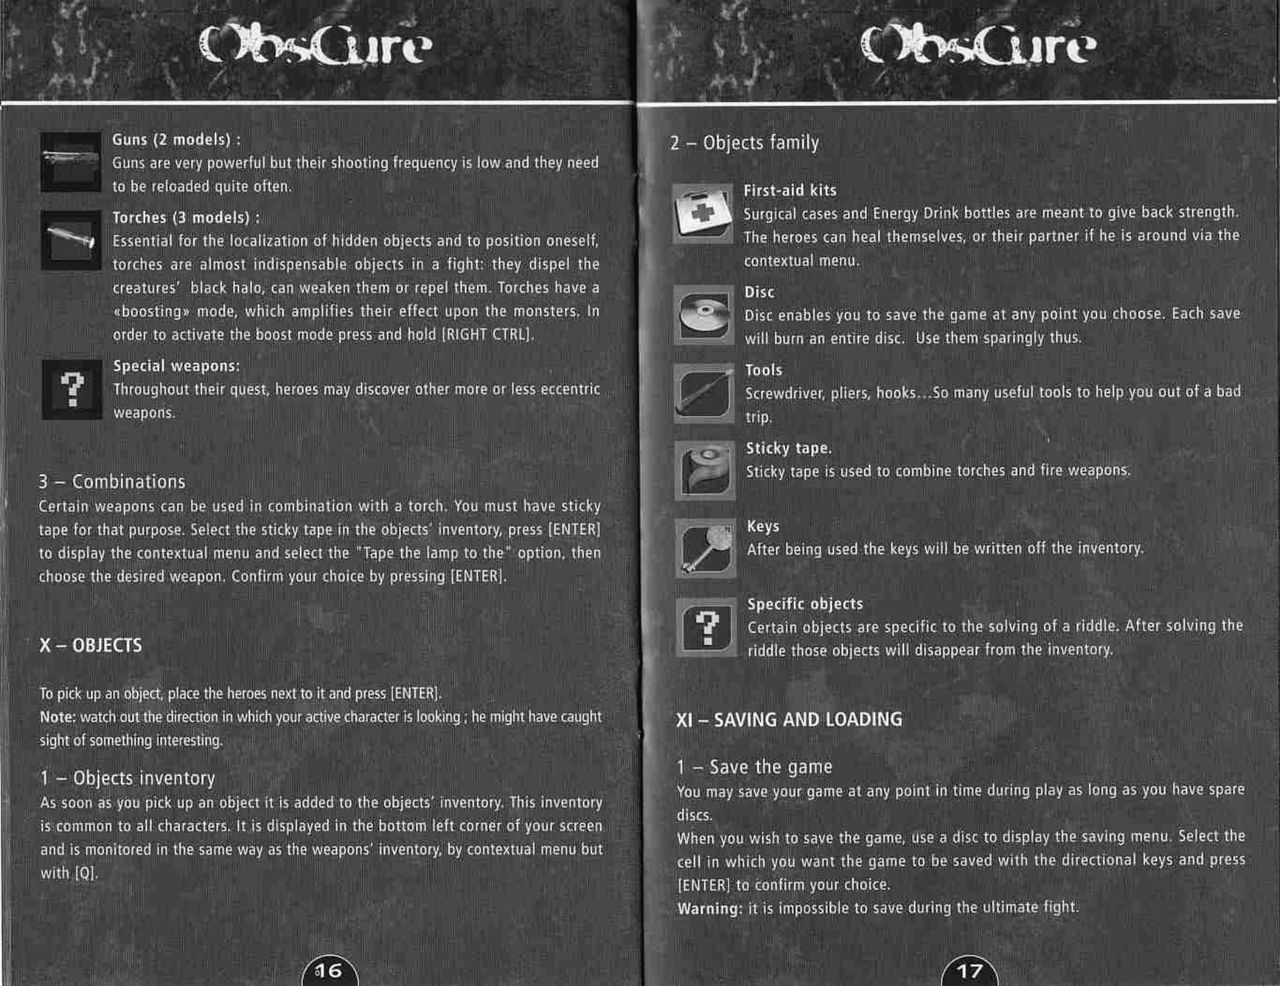 Obscure (PC (DOS/Windows)) Game Manual 9